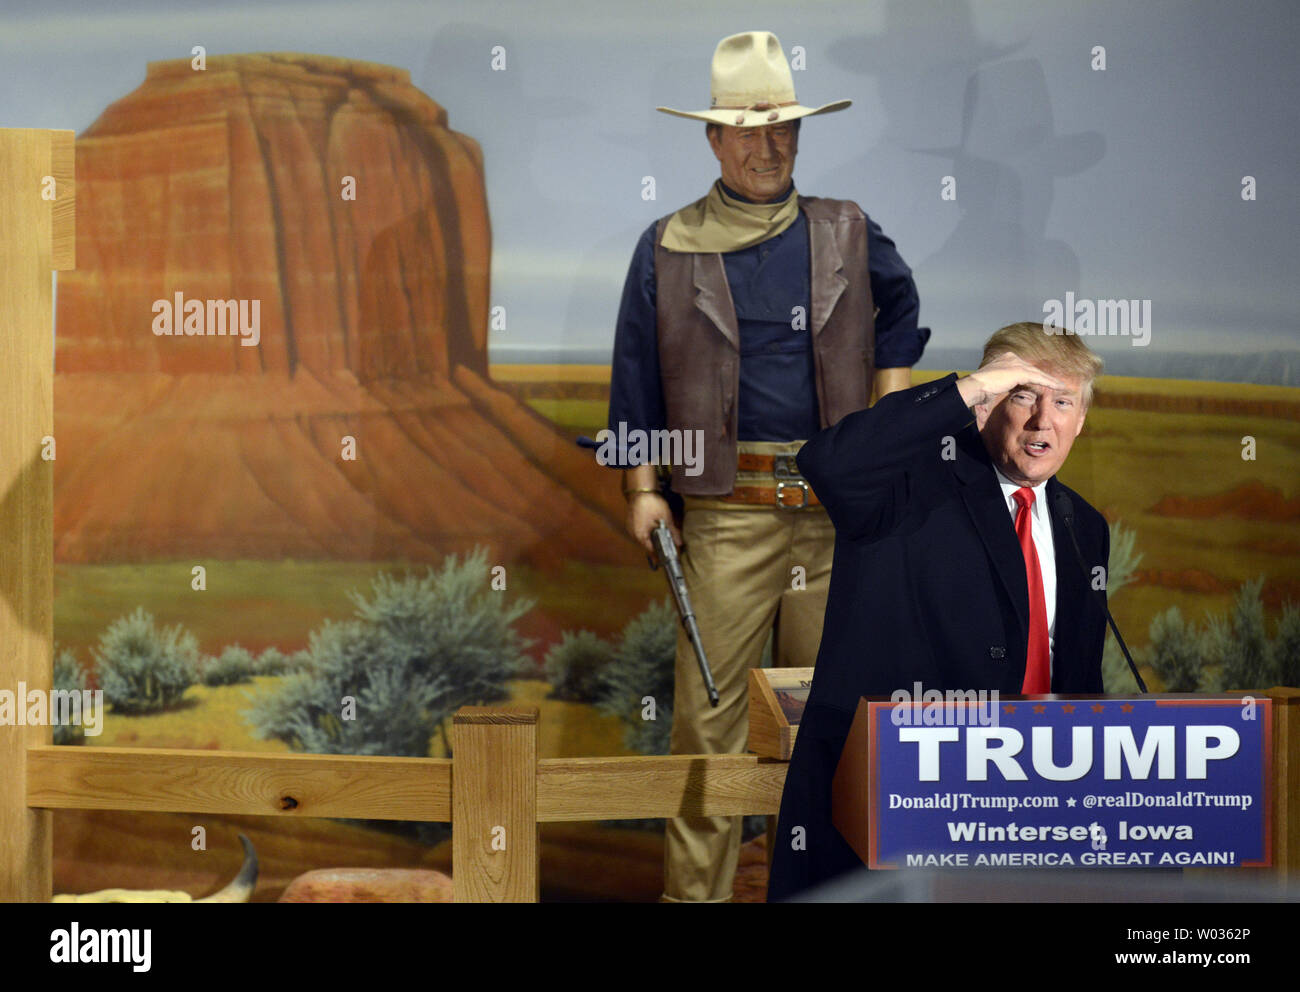 Real estate mogul Donald J. Trump, 2016 Republican presidential candidate, shields his eyes as accepts questions at the John Wayne Birthplace Museum, after Wayne's daughter Aissa endorsed his campaign, January 19, 2016, in Winterset, Iowa. Trump is running against a large field of GOP candidates including Texas Sen. Ted Cruz, Florida Sen. Marco Rubio and retired neurosurgeon Ben Carson, ahead of Iowa's first-in-the-nation caucuses February 1. Photo by Mike Theiler/UPI Stock Photo